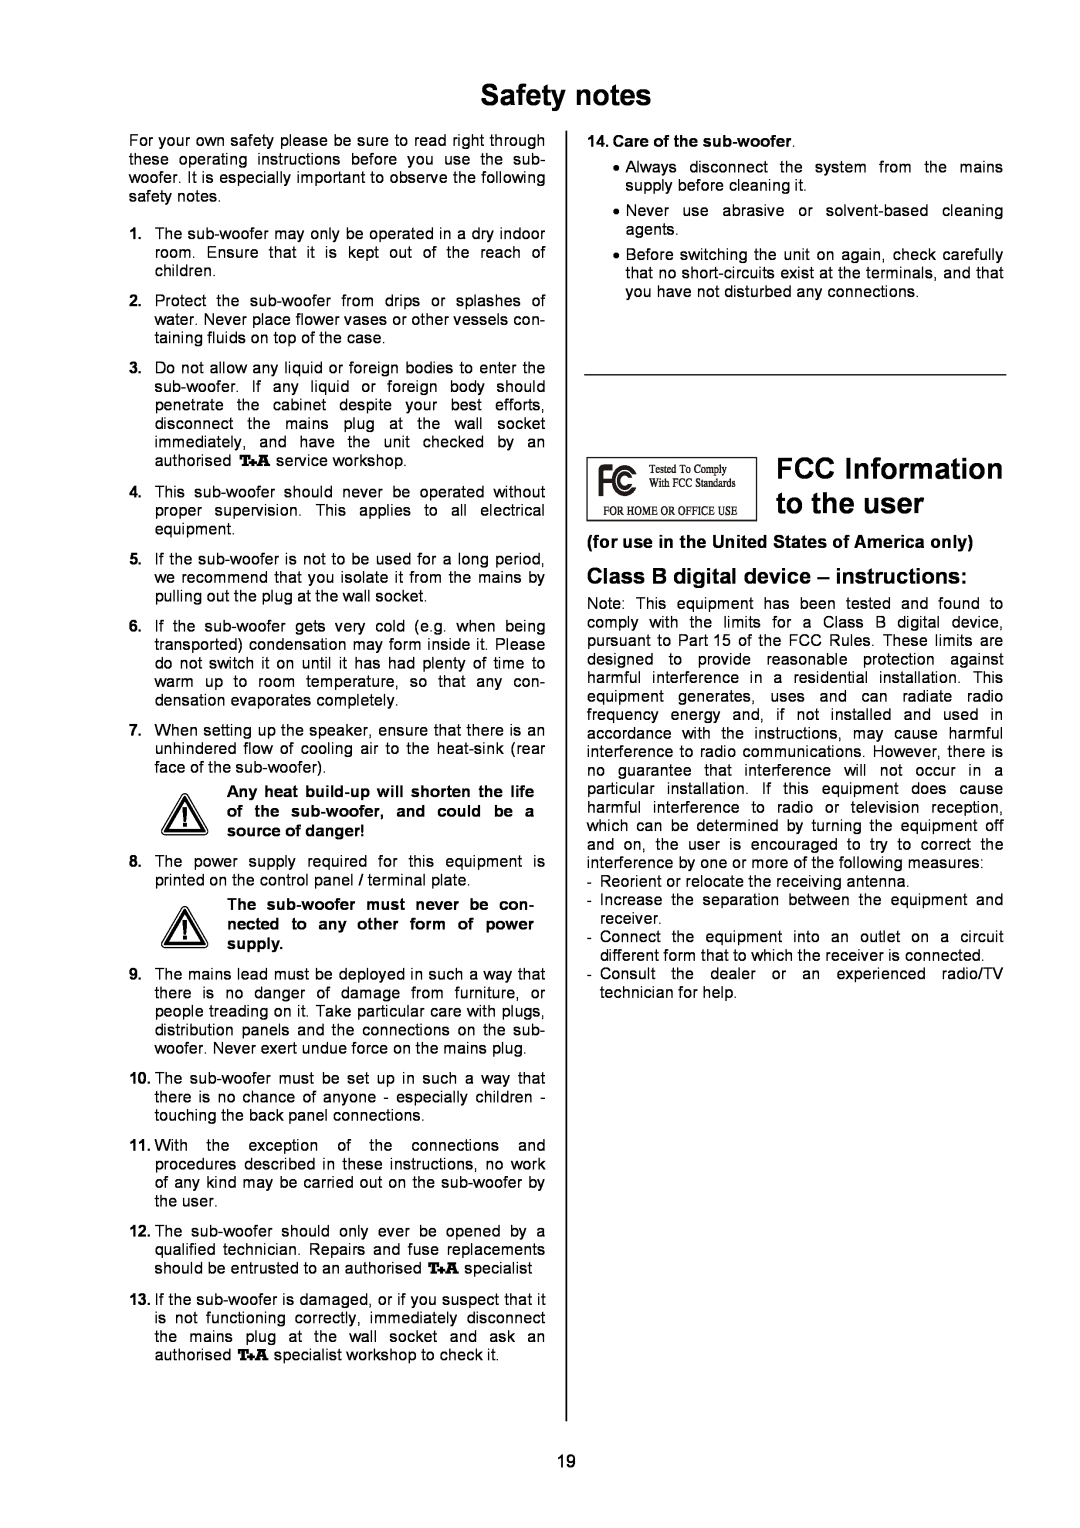 T+A Elektroakustik AE 14 user manual Safety notes, FCC Information to the user, Class B digital device - instructions 